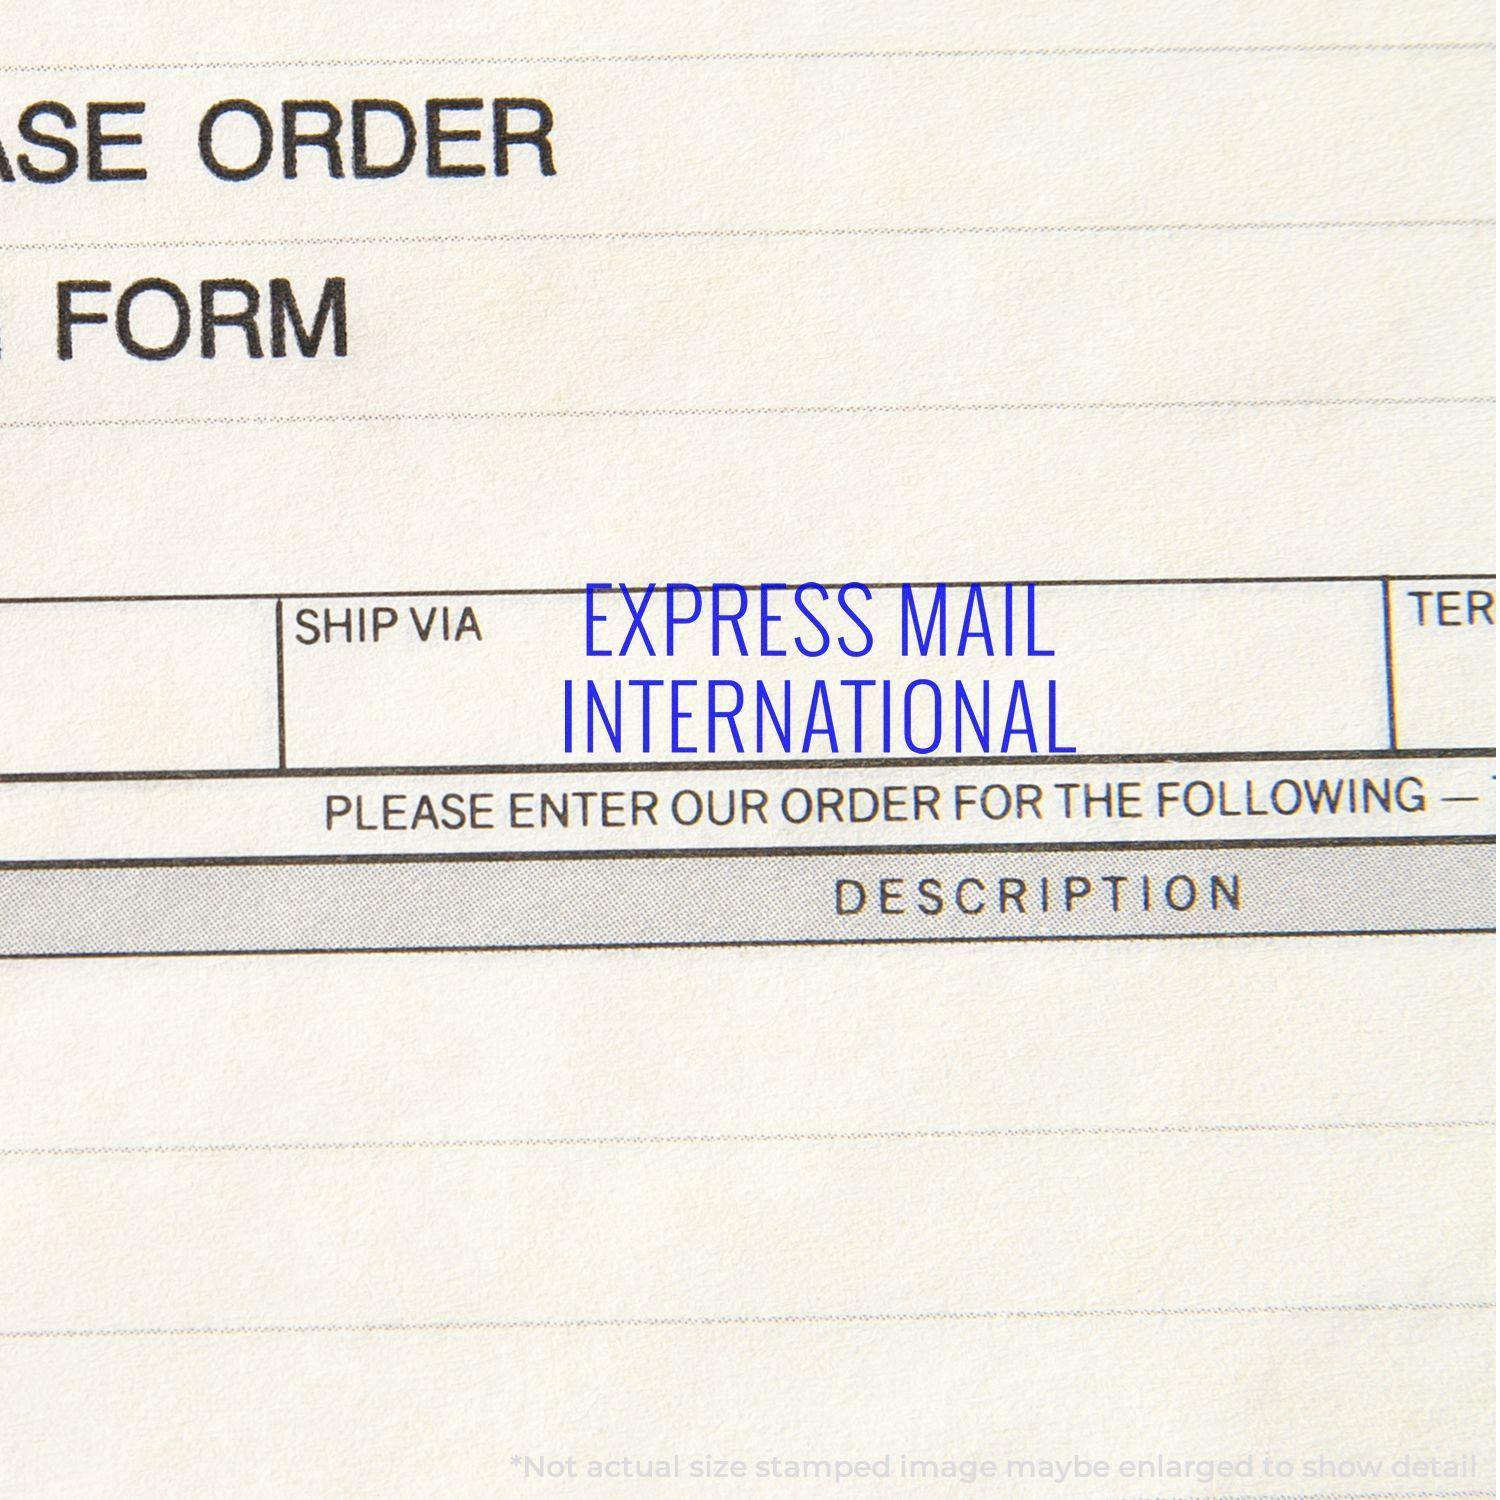 A self-inking stamp with a stamped image showing how the text "EXPRESS MAIL INTERNATIONAL" is displayed after stamping.